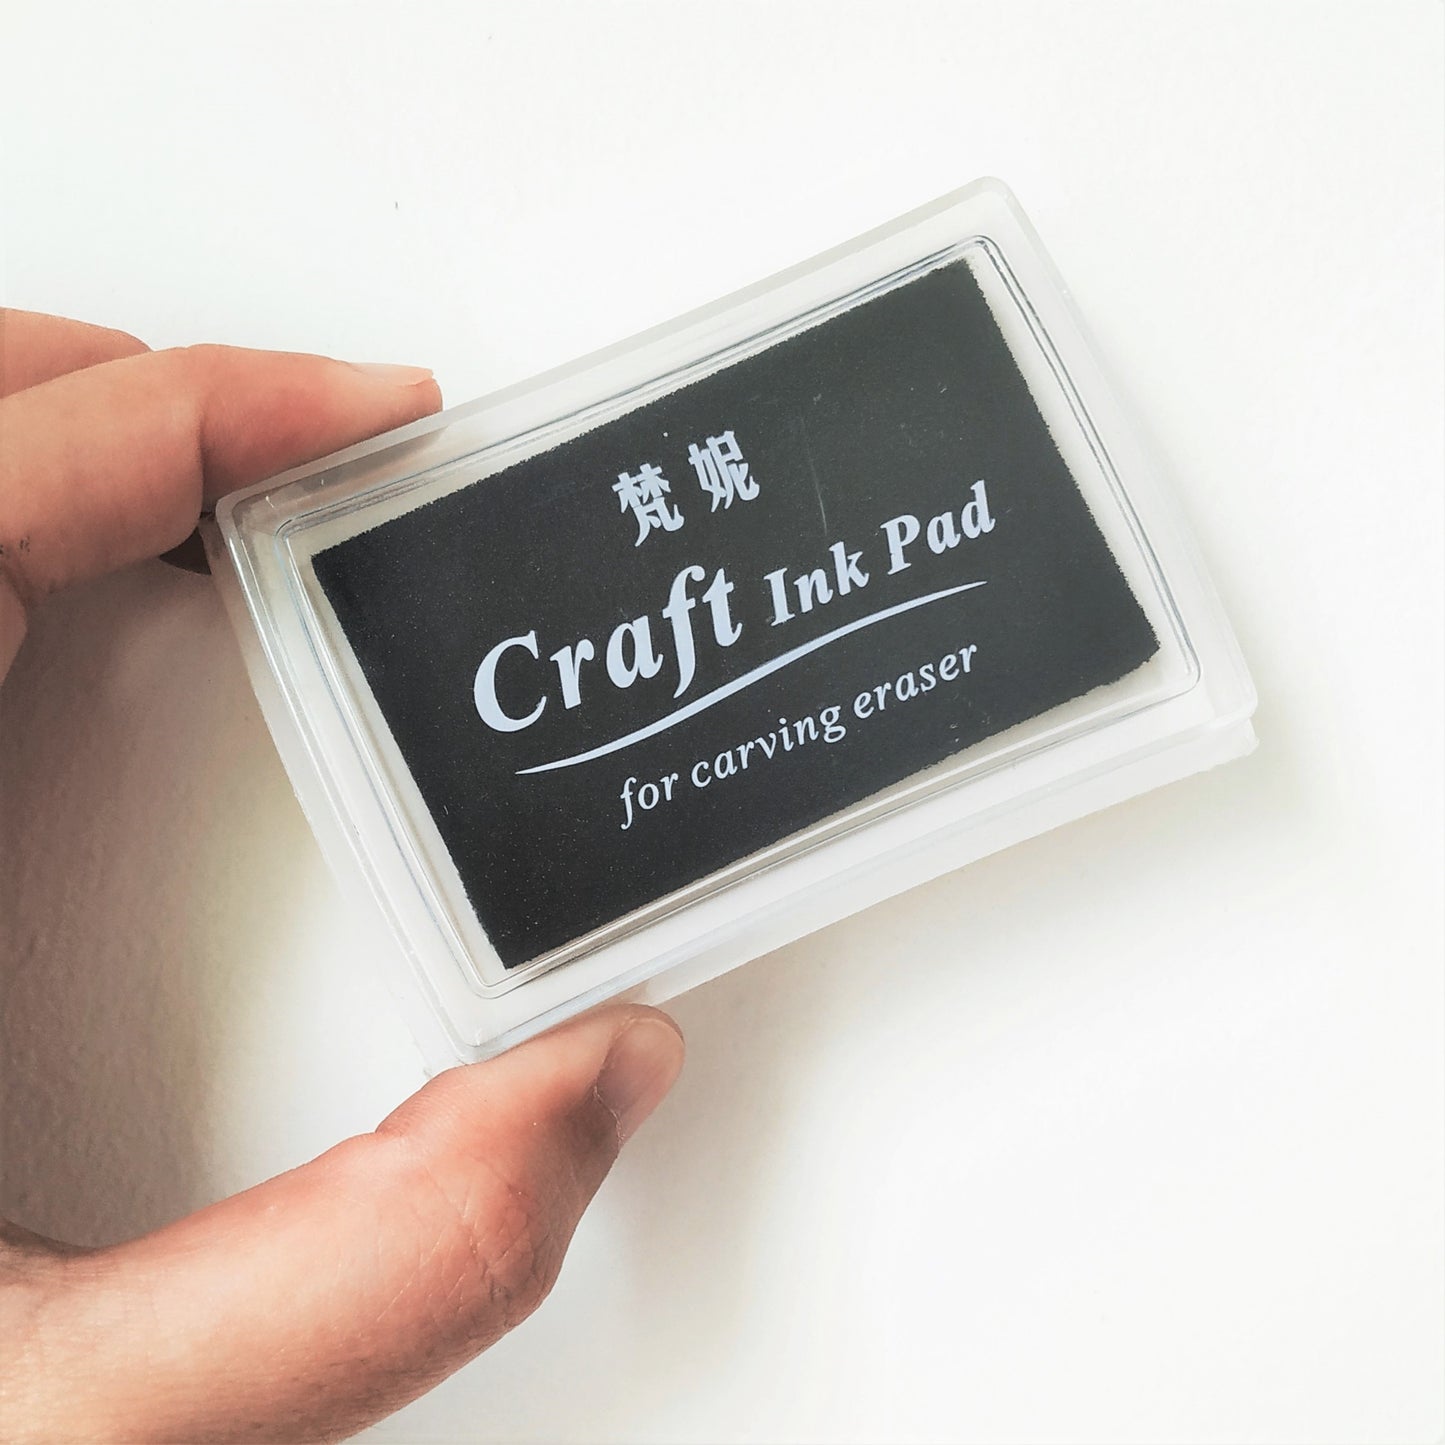 Craft ink pad for rubber stamps